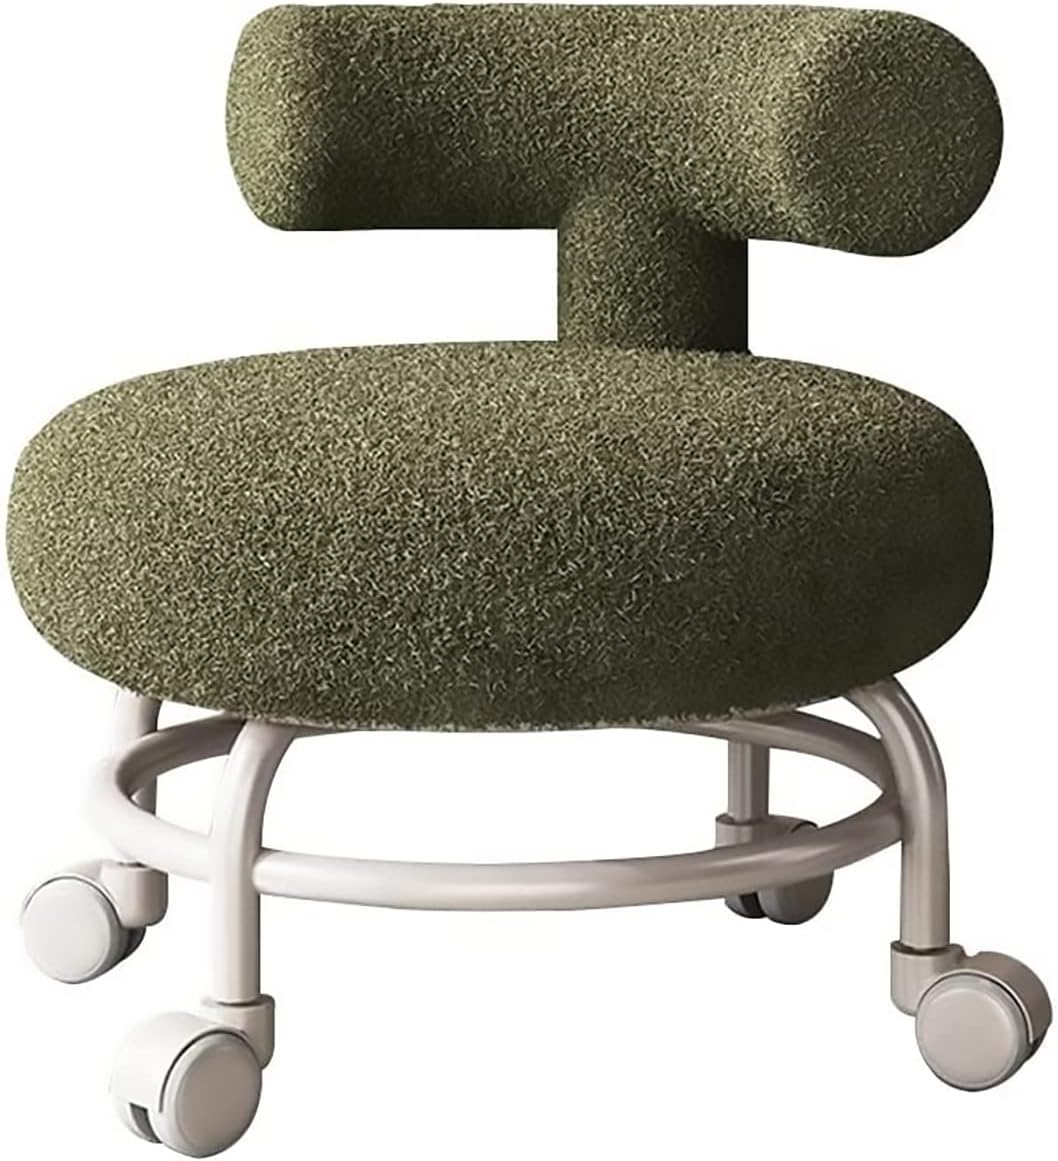 Durable chair with velor seat and wheels